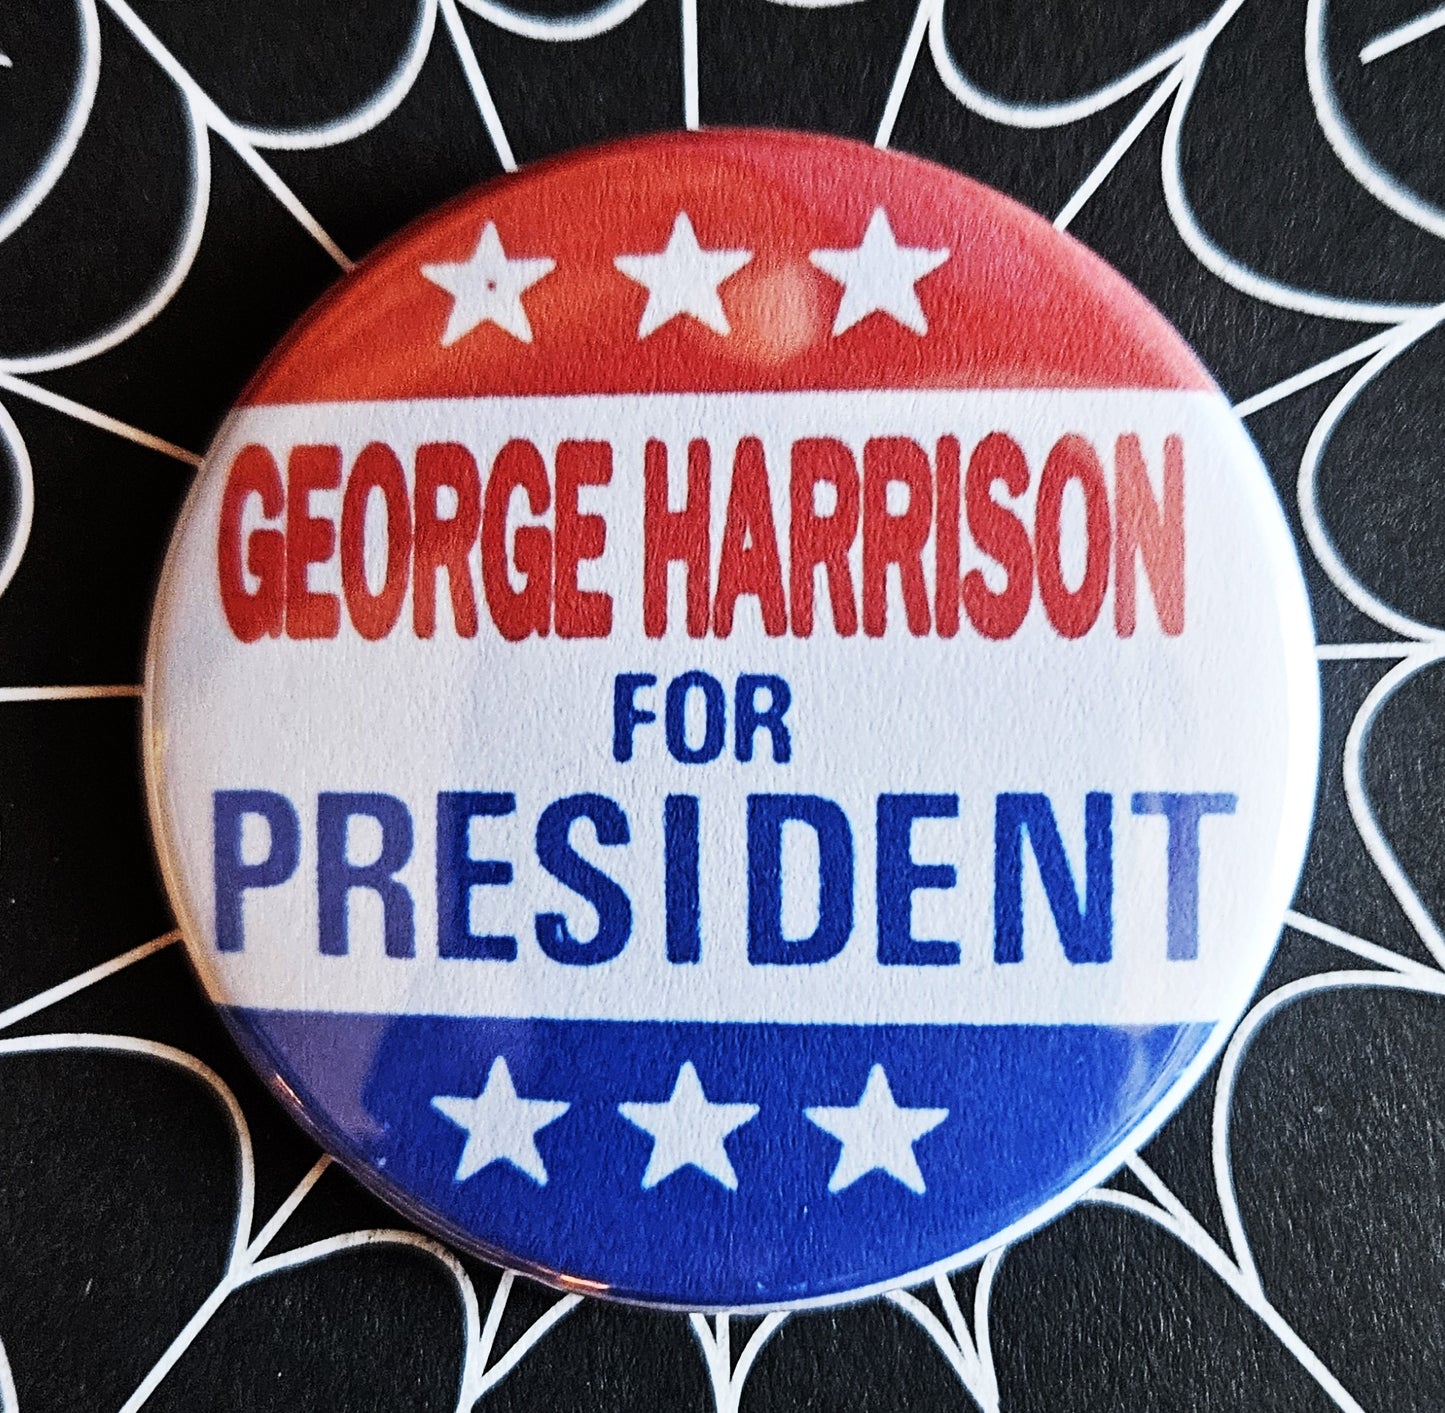 Rockers for President pinback Buttons & Bottle Openers. Set 7